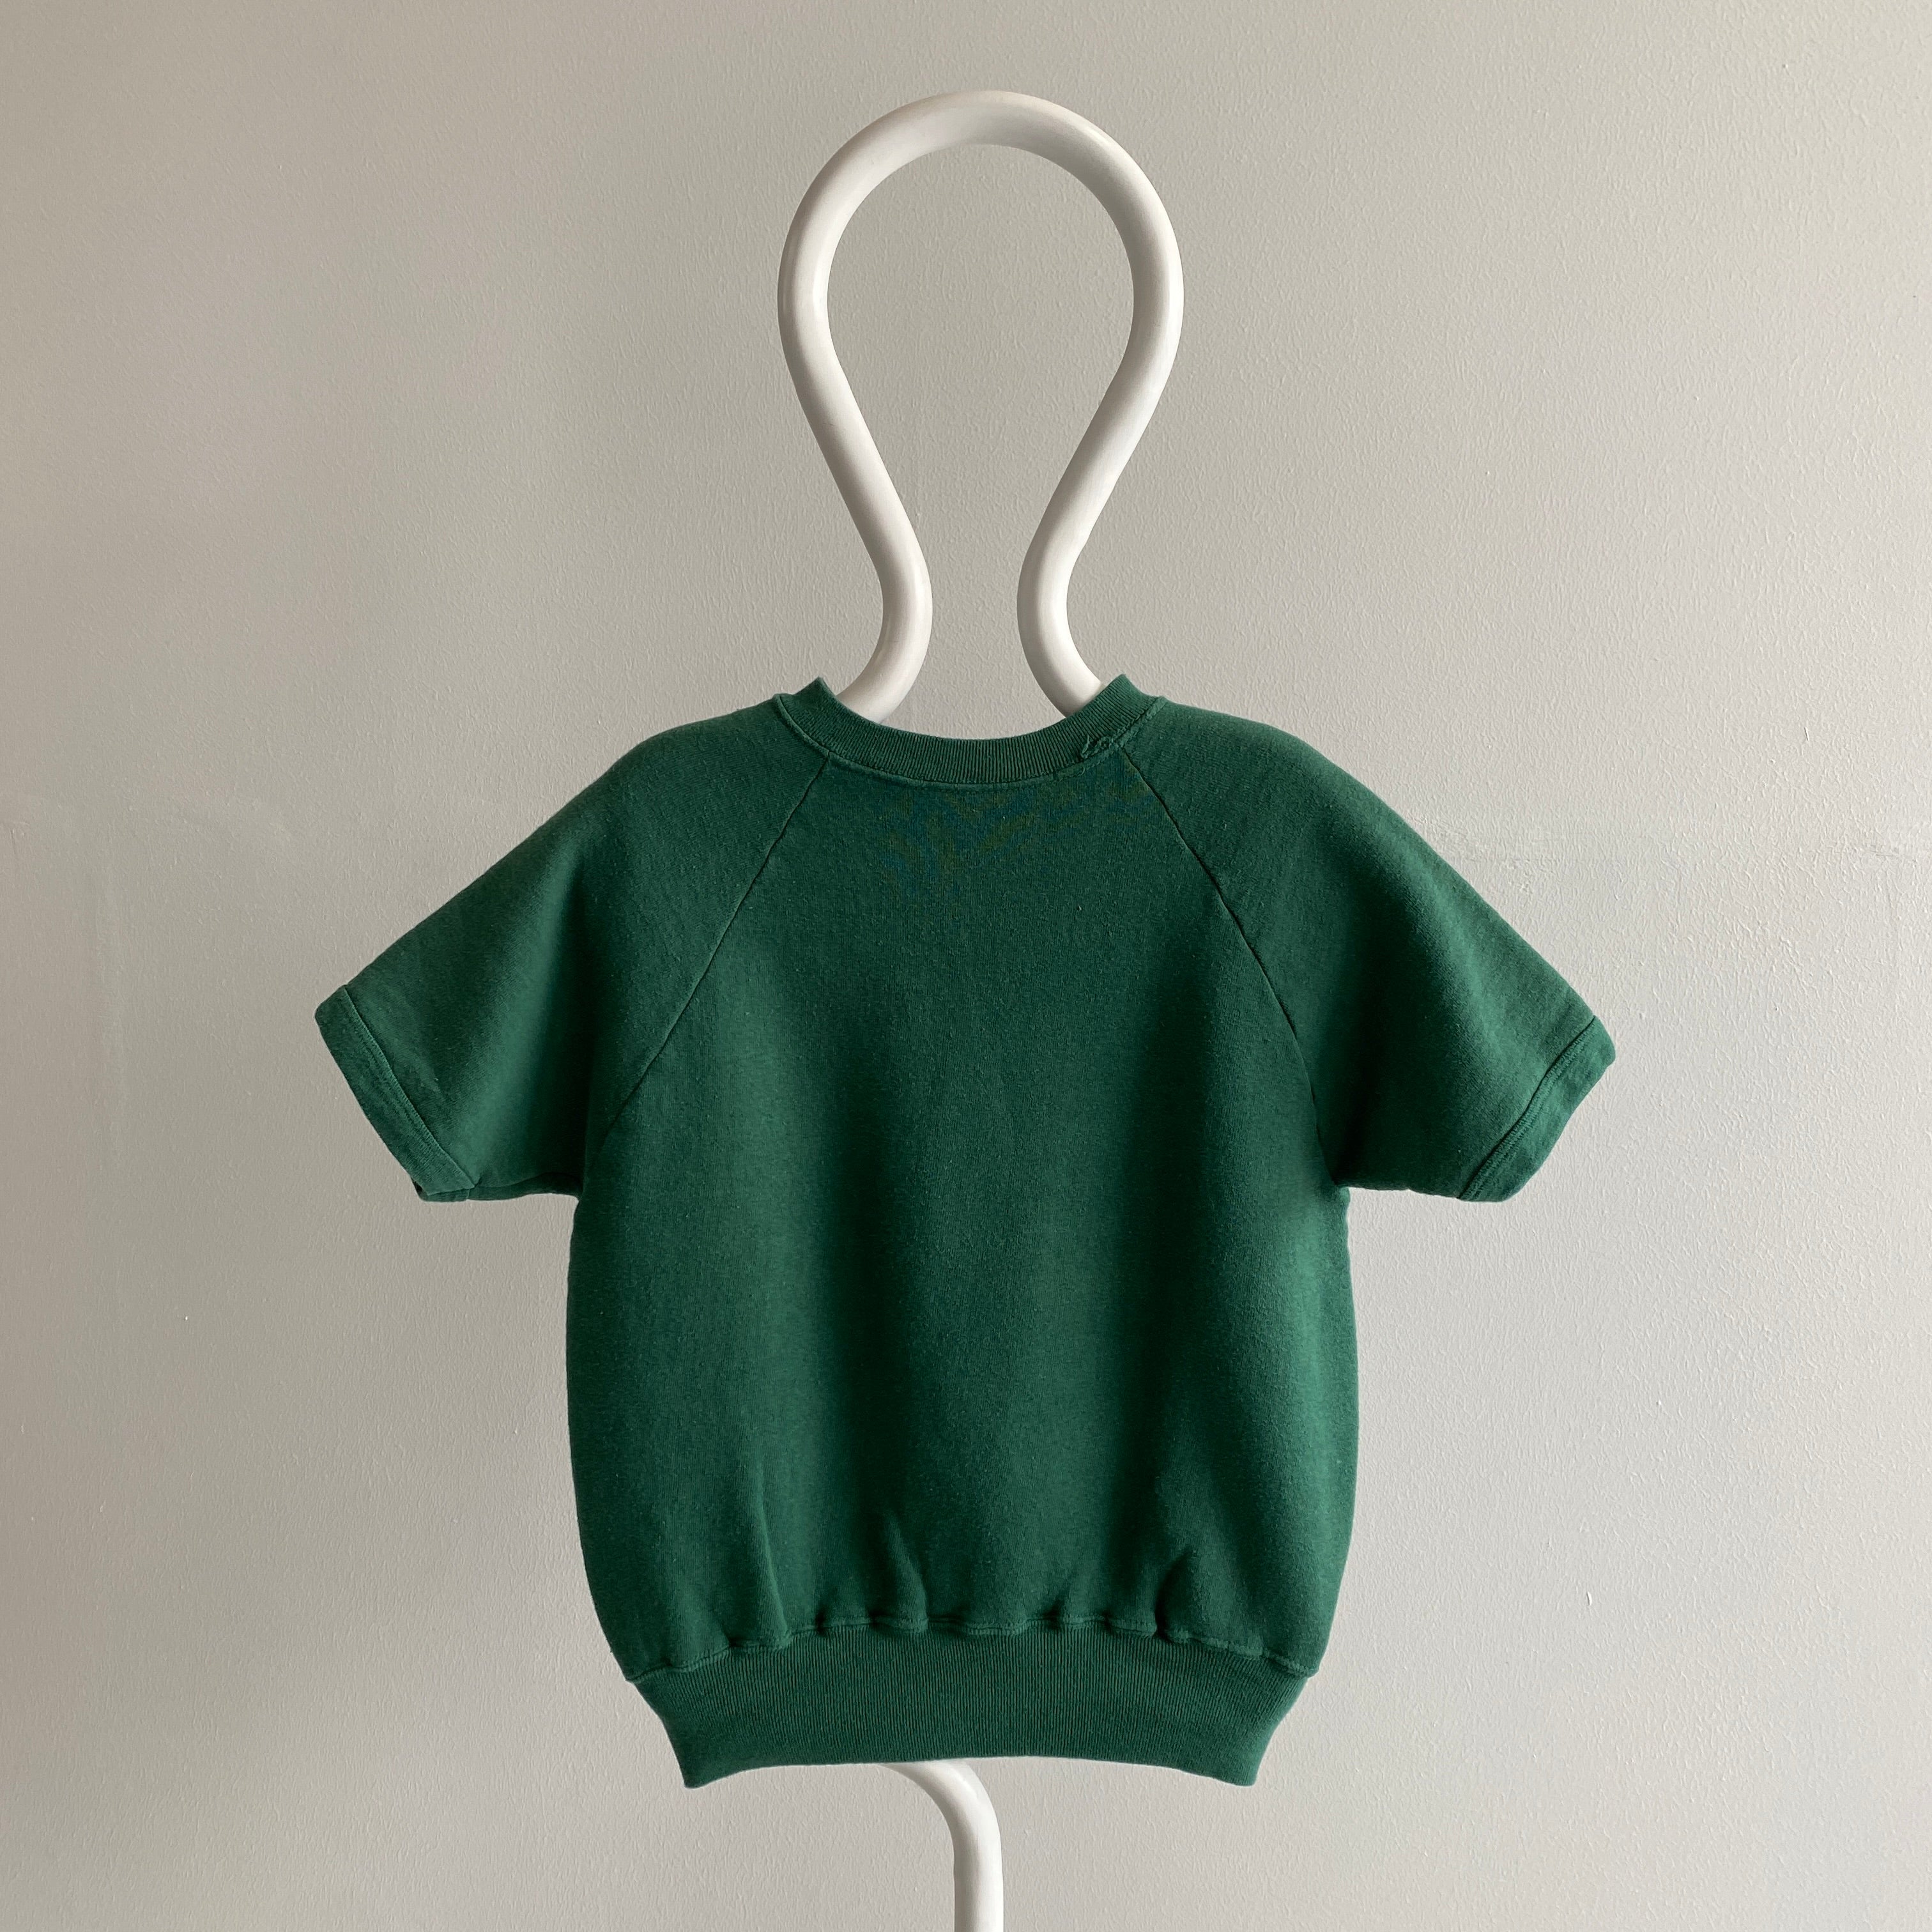 1970s Faded Dark Green Warm Up with Rolled Sleeve Hems - Cozy!